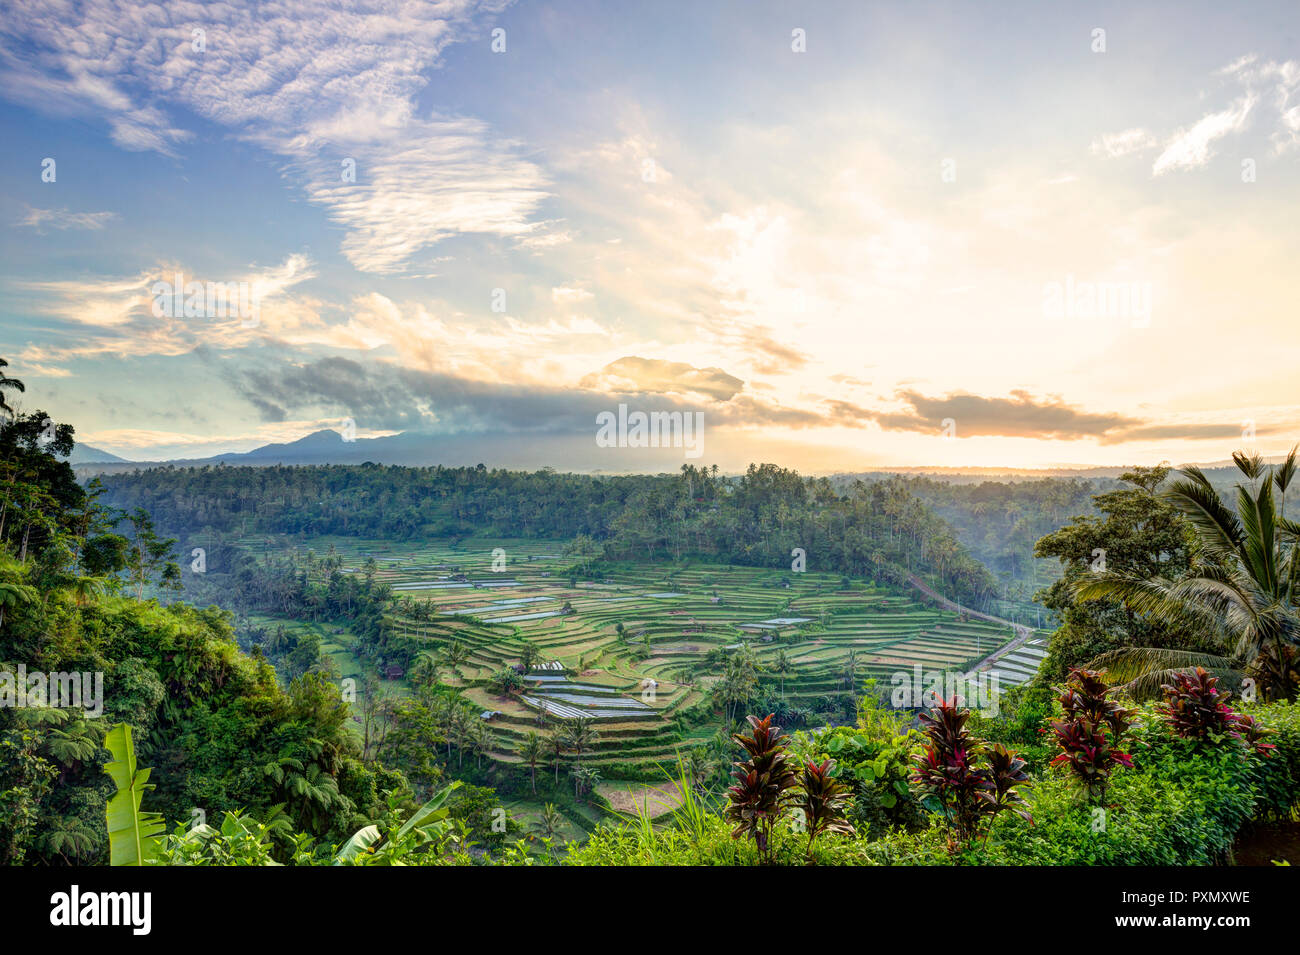 View of rice terraces and Gunung Agung volcano at sunrise, Rendang, Bali, Indonesia Stock Photo